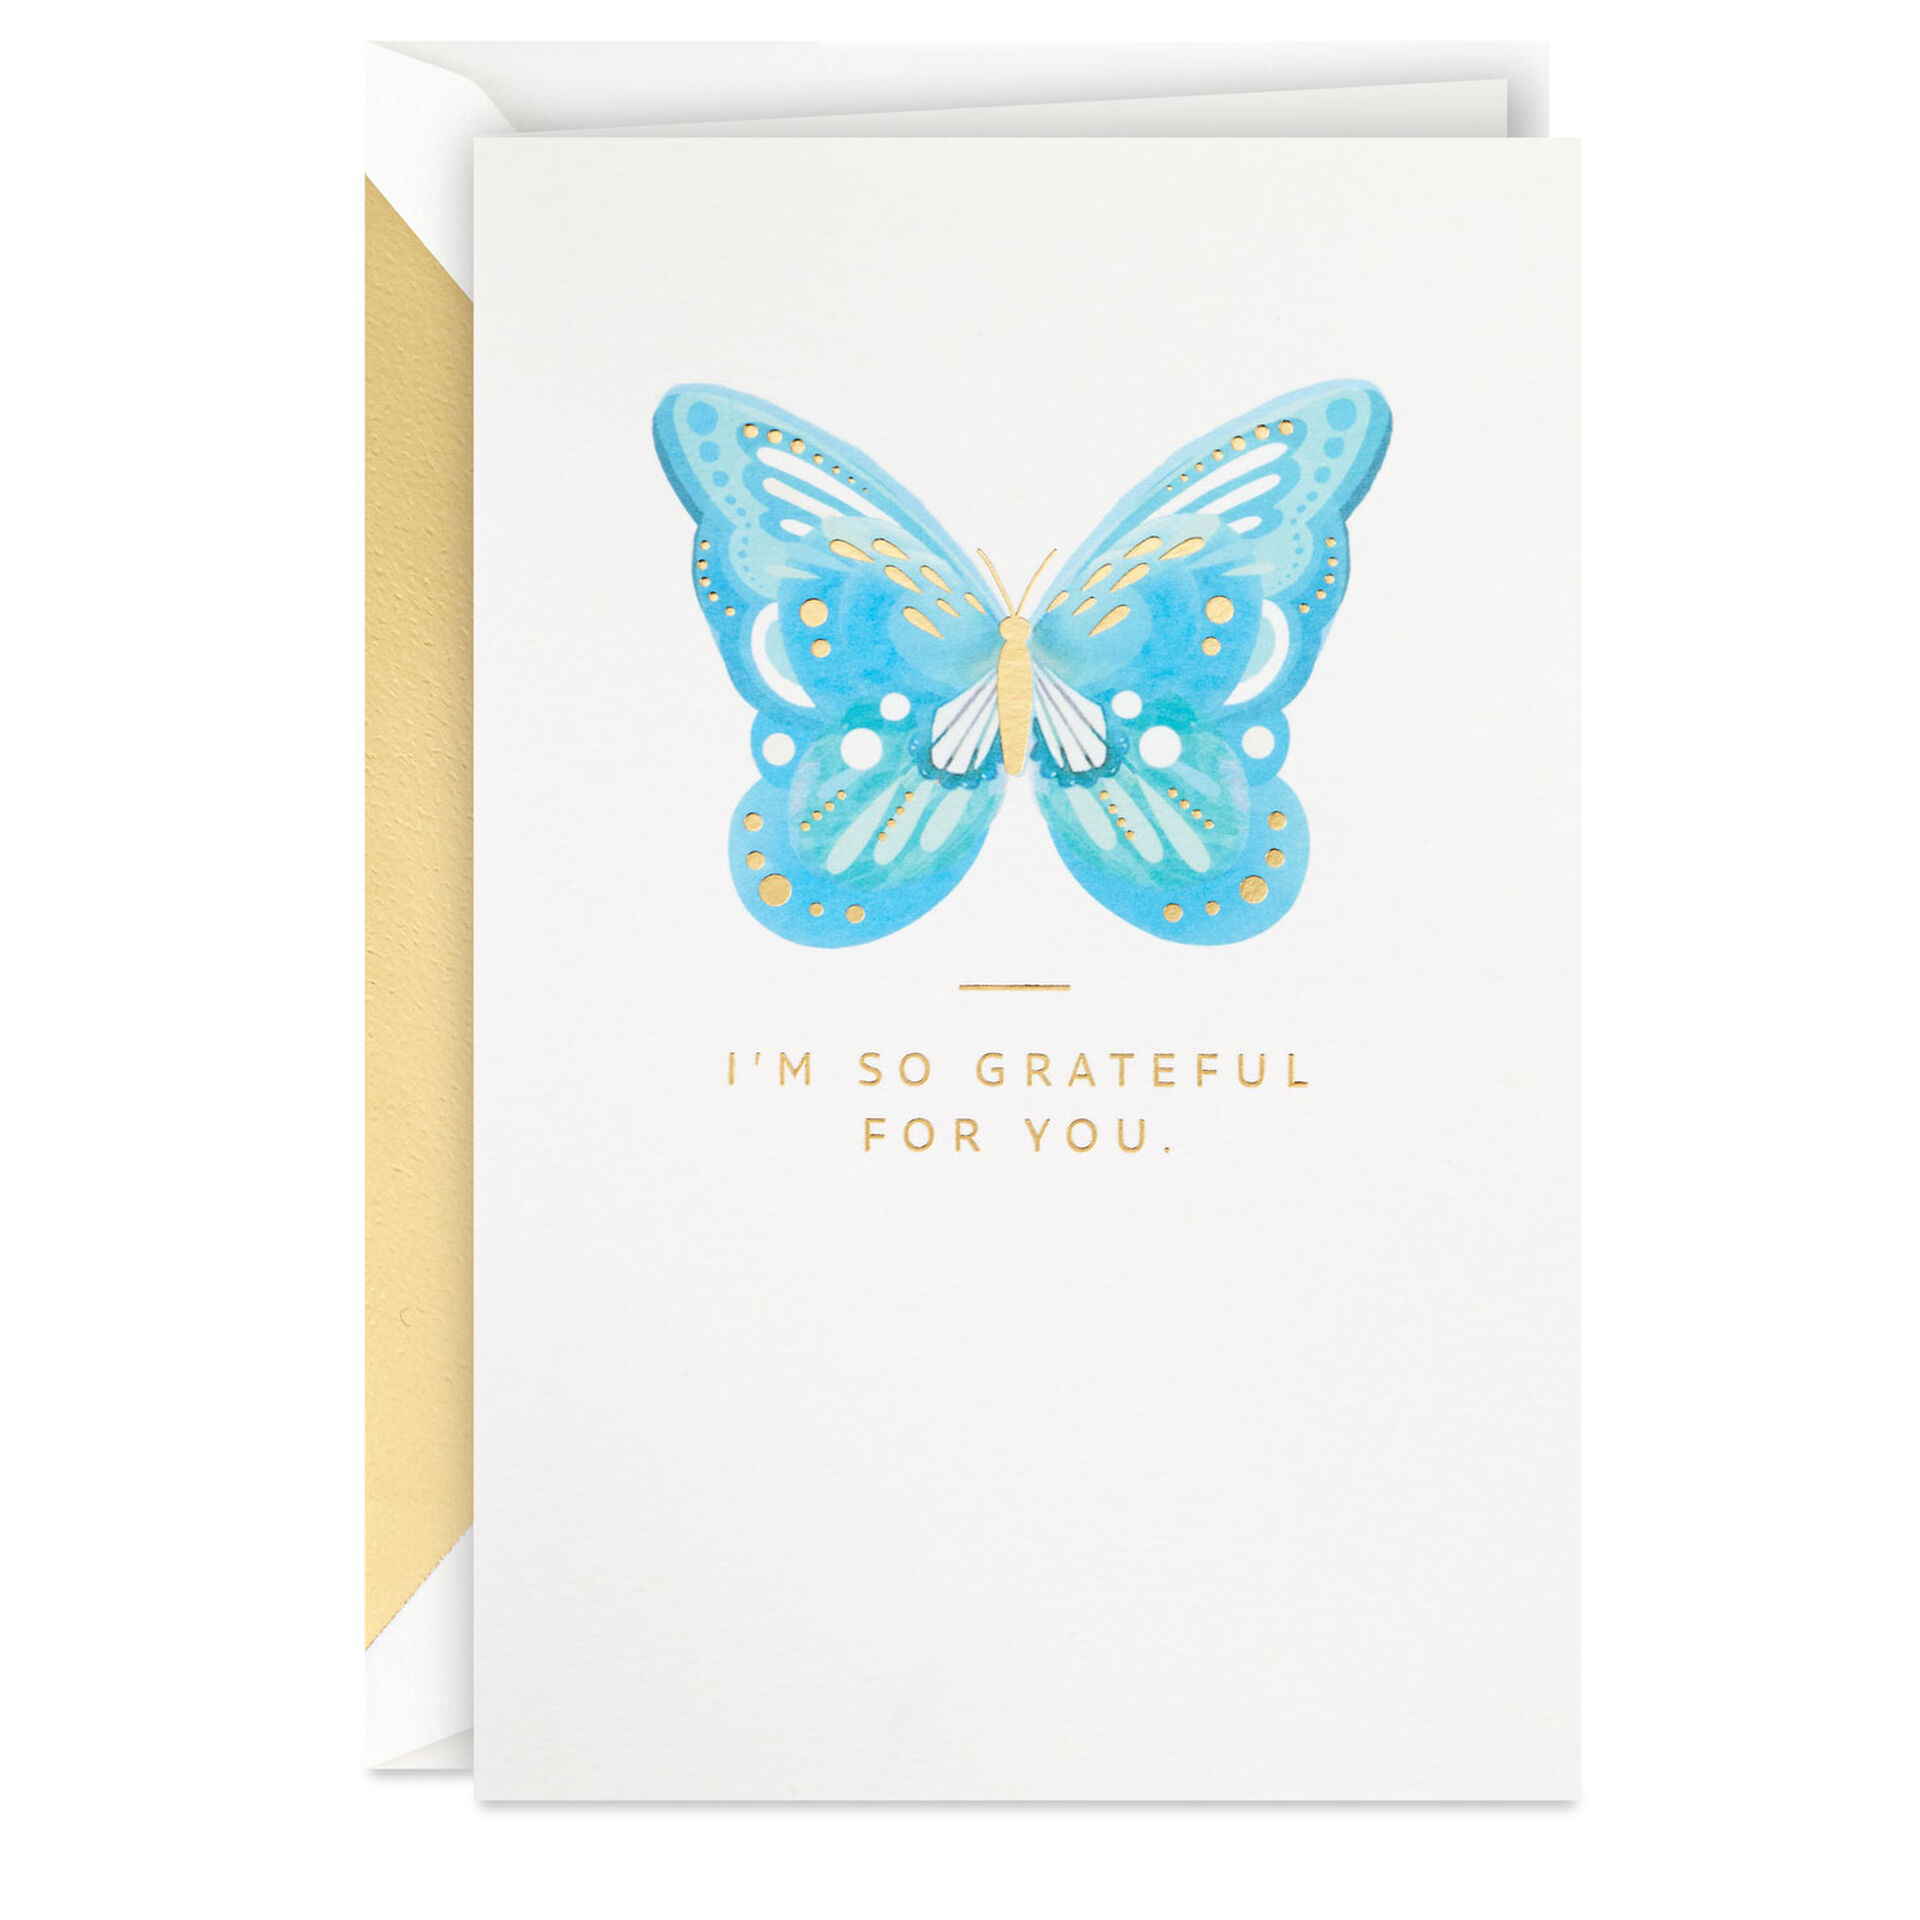 Grateful-for-You-Butterfly-Birthday-Card_599LAD9840_01